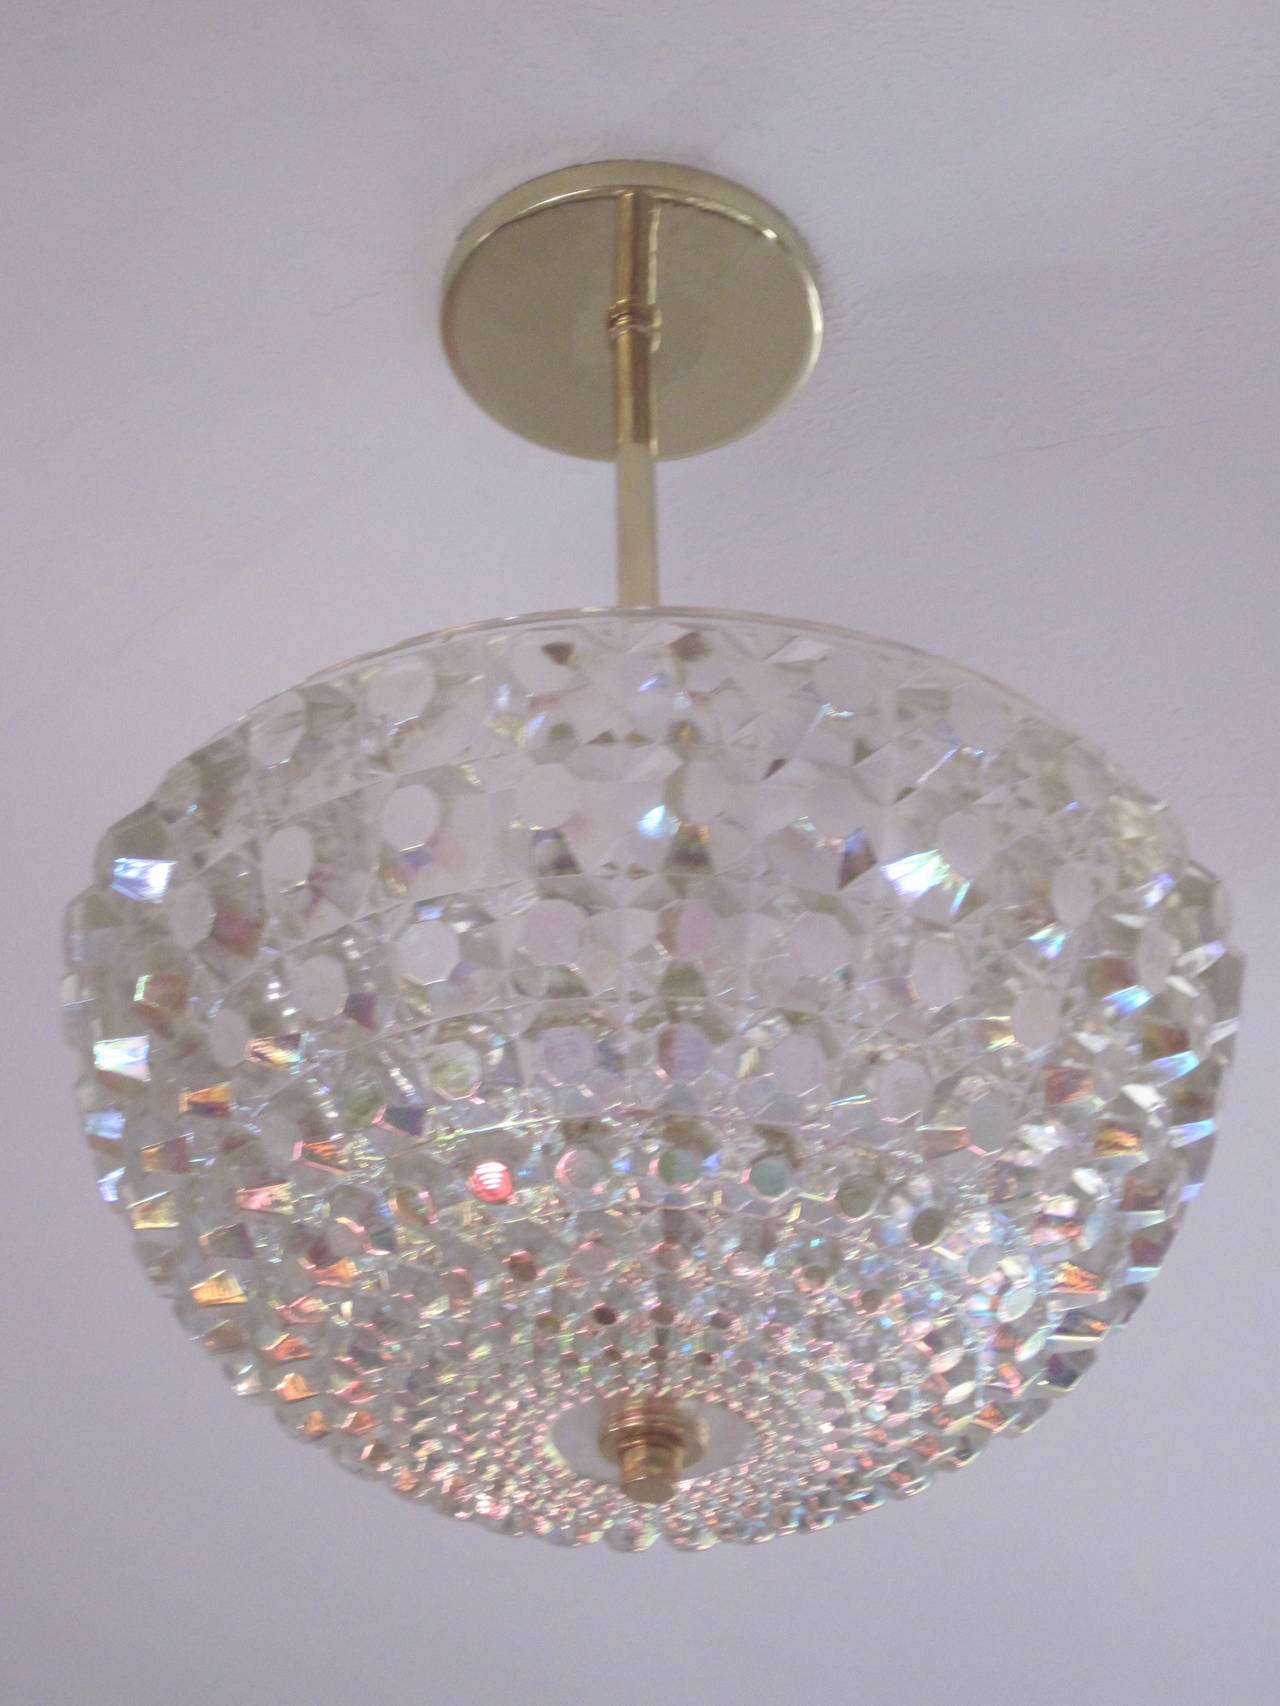 2 Austrian Mid-Century Modern cut crystal pendants or chandeliers attributed to Bakalowits and Sohne and cut in an octagonal pattern to defract and reflect light in a prism of muted color. Solid brass canopy, stem and finial. The current stem height